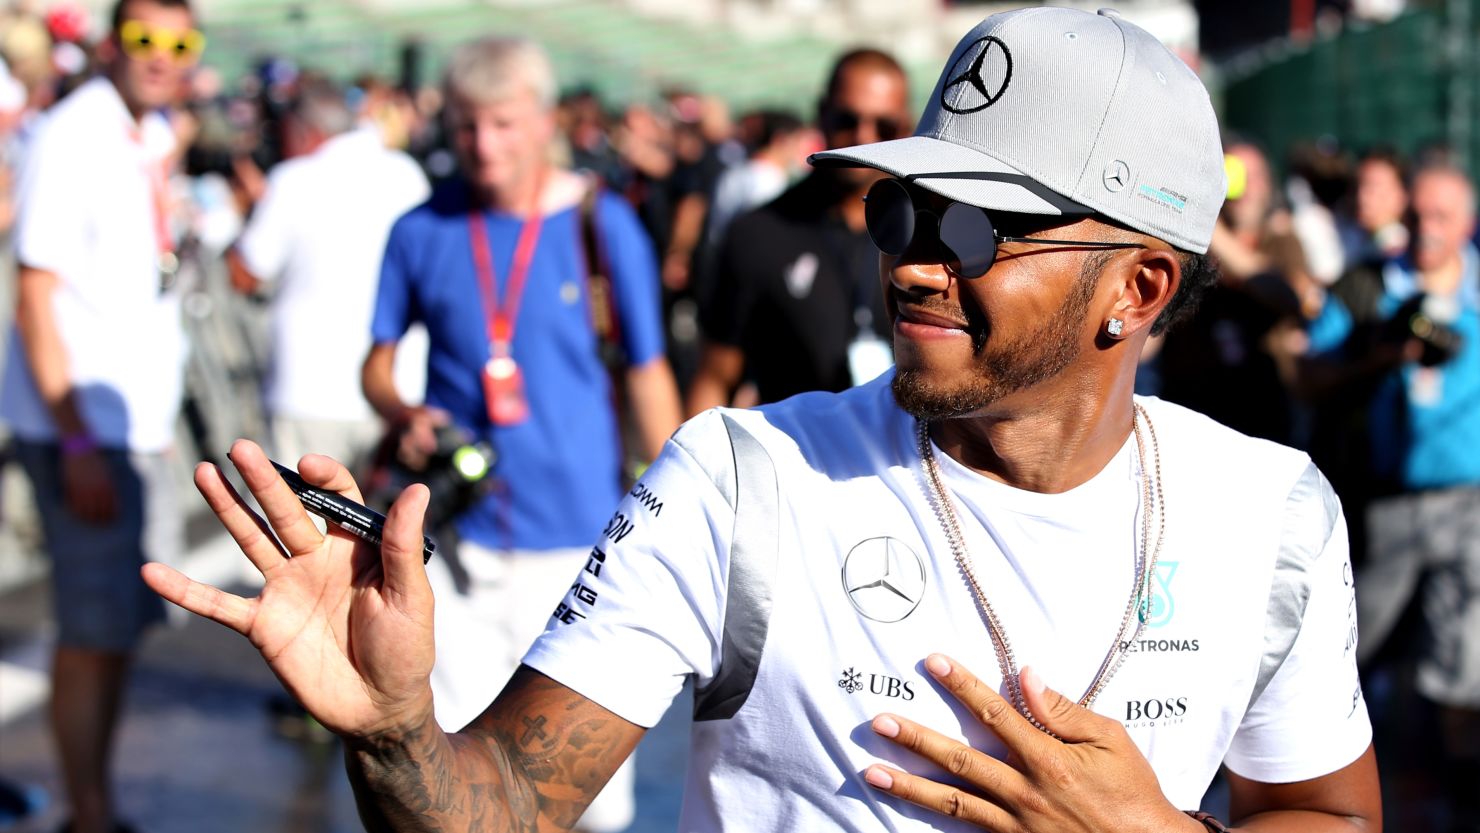 Lewis Hamilton waves to the fans at the Spa-Francorchamps circuit in Belgium.